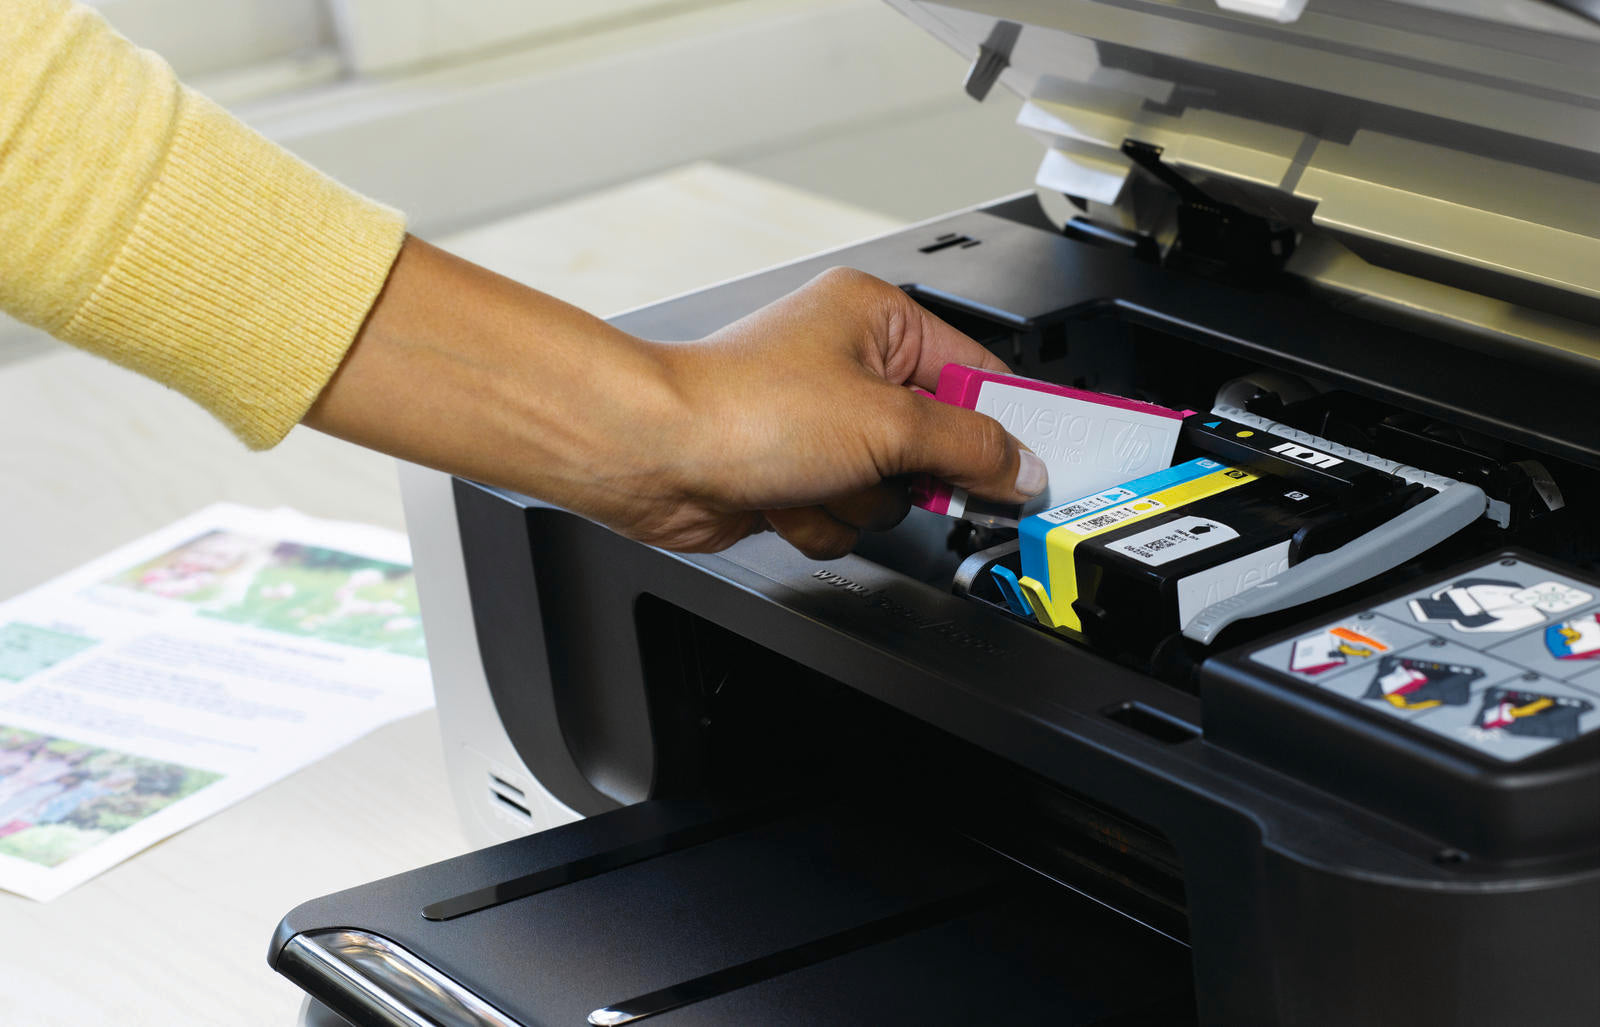 a woman loads a new magenta ink cartridge into her printer